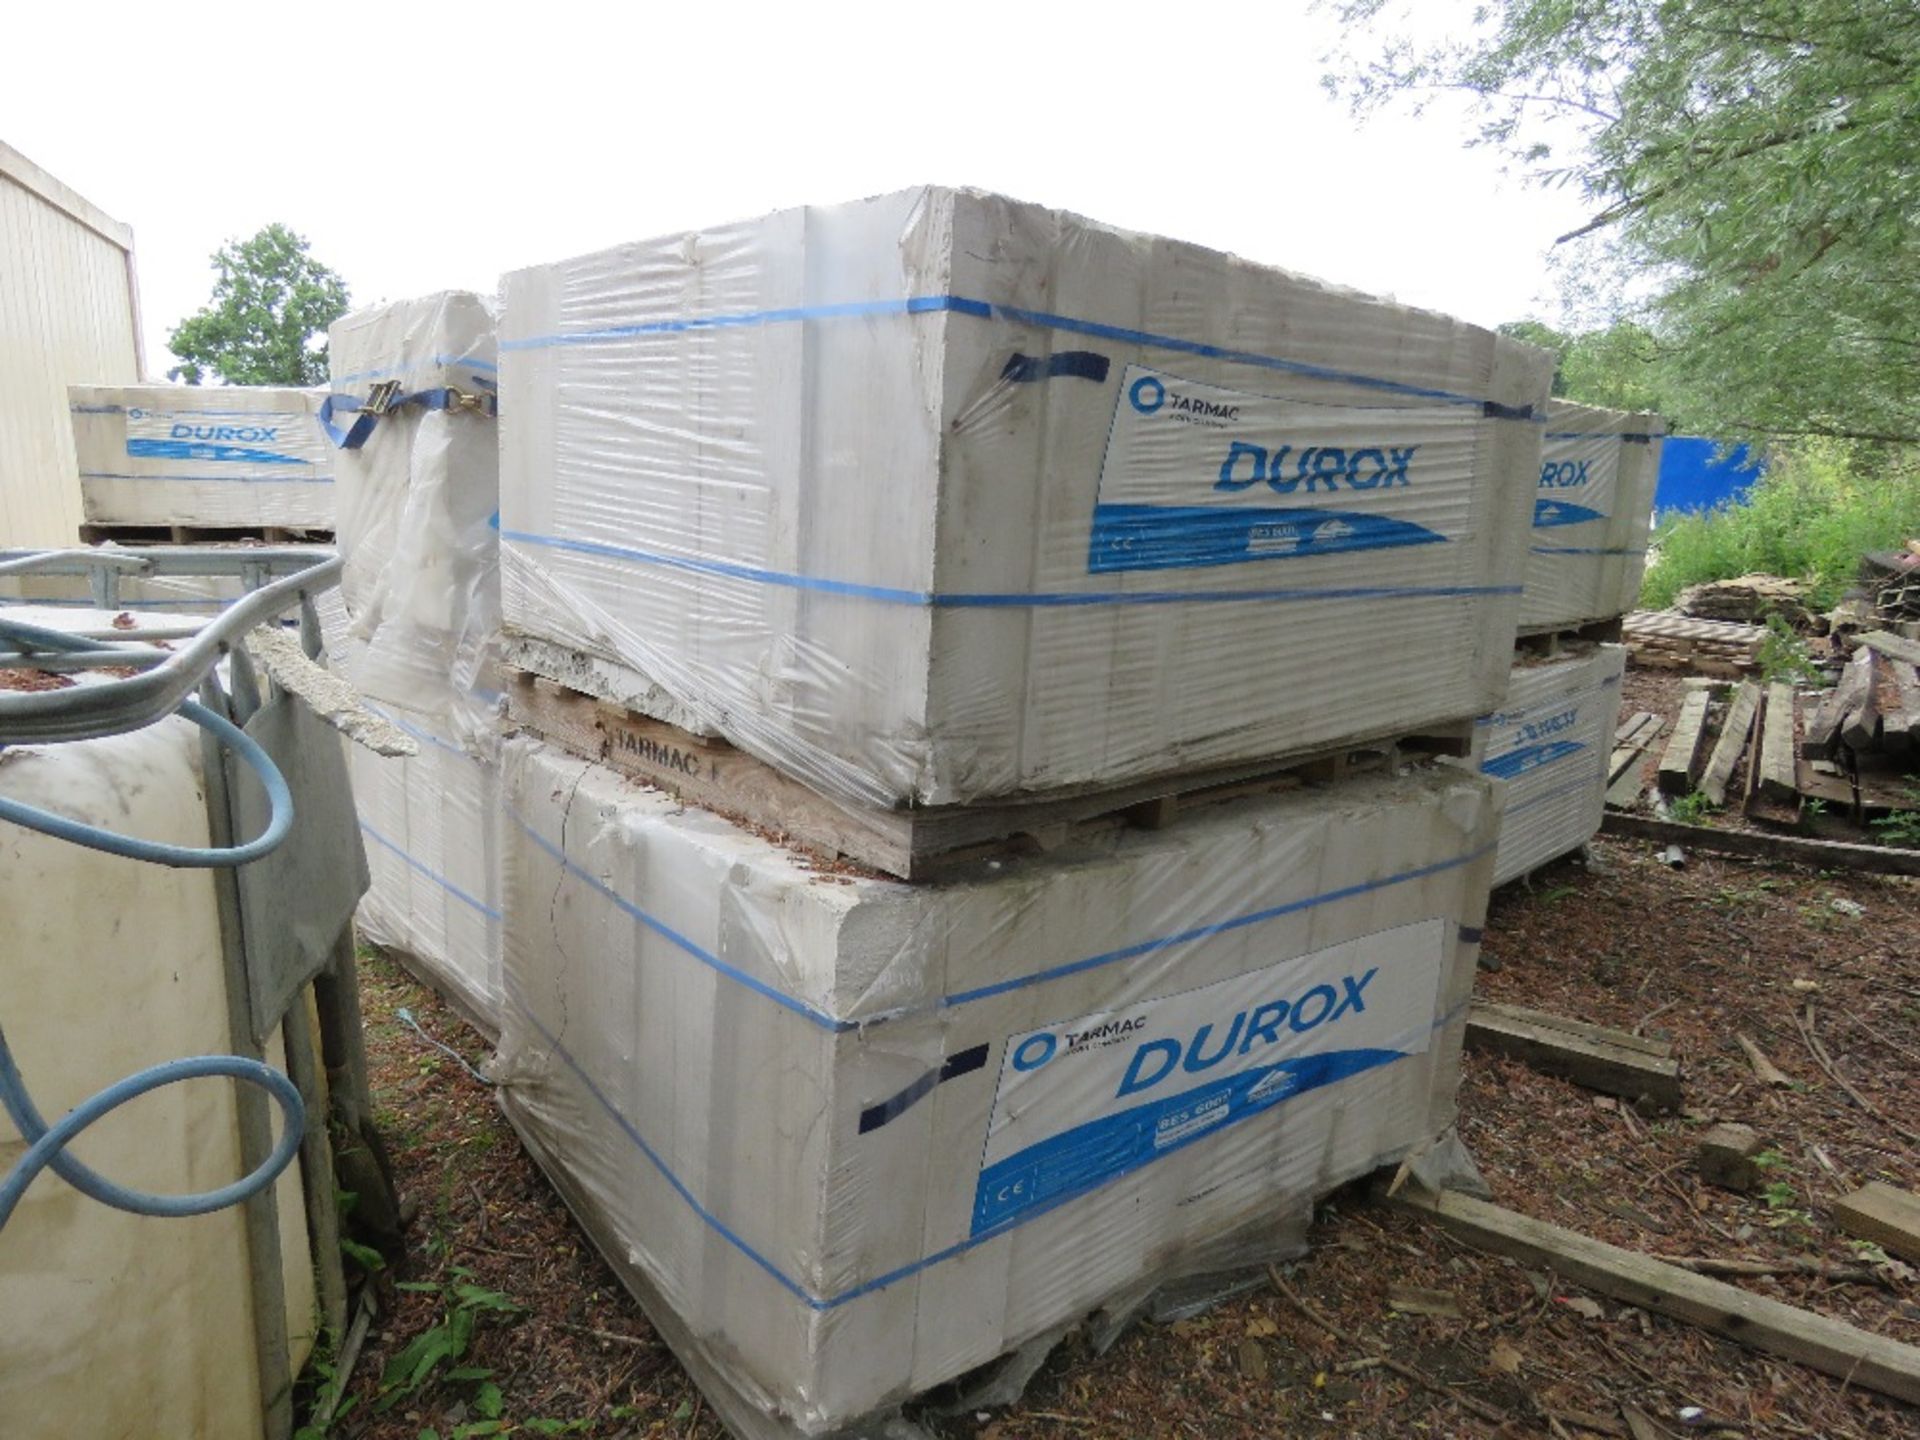 4 X PACKS OF DUROX LIGHTWEIGHT BUILDING BLOCKS 60 X 14 X 20CM APPROX, 50NO PER PACK, 100NO IN TOTAL - Image 4 of 4